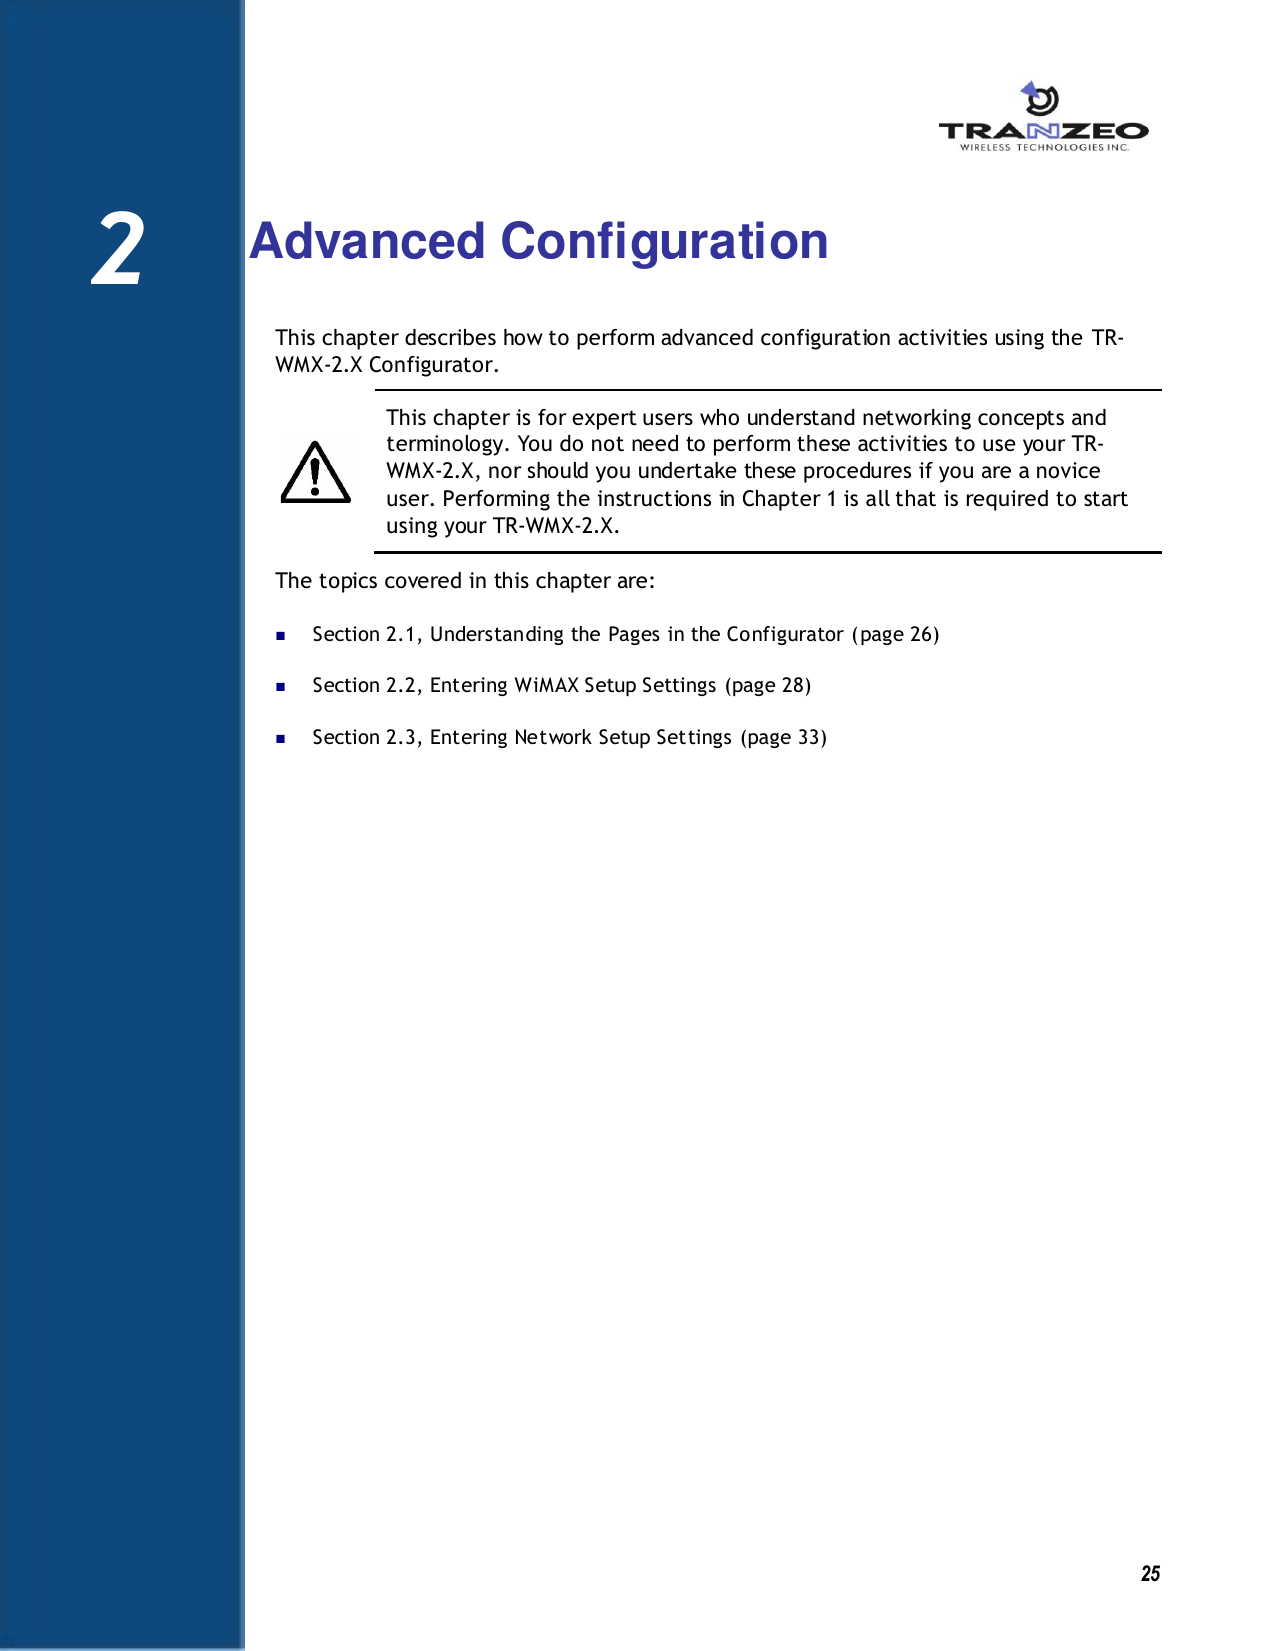   25  2  Advanced Configuration This chapter describes how to perform advanced configuration activities using the TR-WMX-2.X Configurator.    This chapter is for expert users who understand networking concepts and terminology. You do not need to perform these activities to use your TR-WMX-2.X, nor should you undertake these procedures if you are a novice user. Performing the instructions in Chapter 1 is all that is required to start using your TR-WMX-2.X. The topics covered in this chapter are:  Section 2.1, Understanding the Pages in the Configurator (page 26)  Section 2.2, Entering WiMAX Setup Settings (page 28)  Section 2.3, Entering Network Setup Settings (page 33)   2 